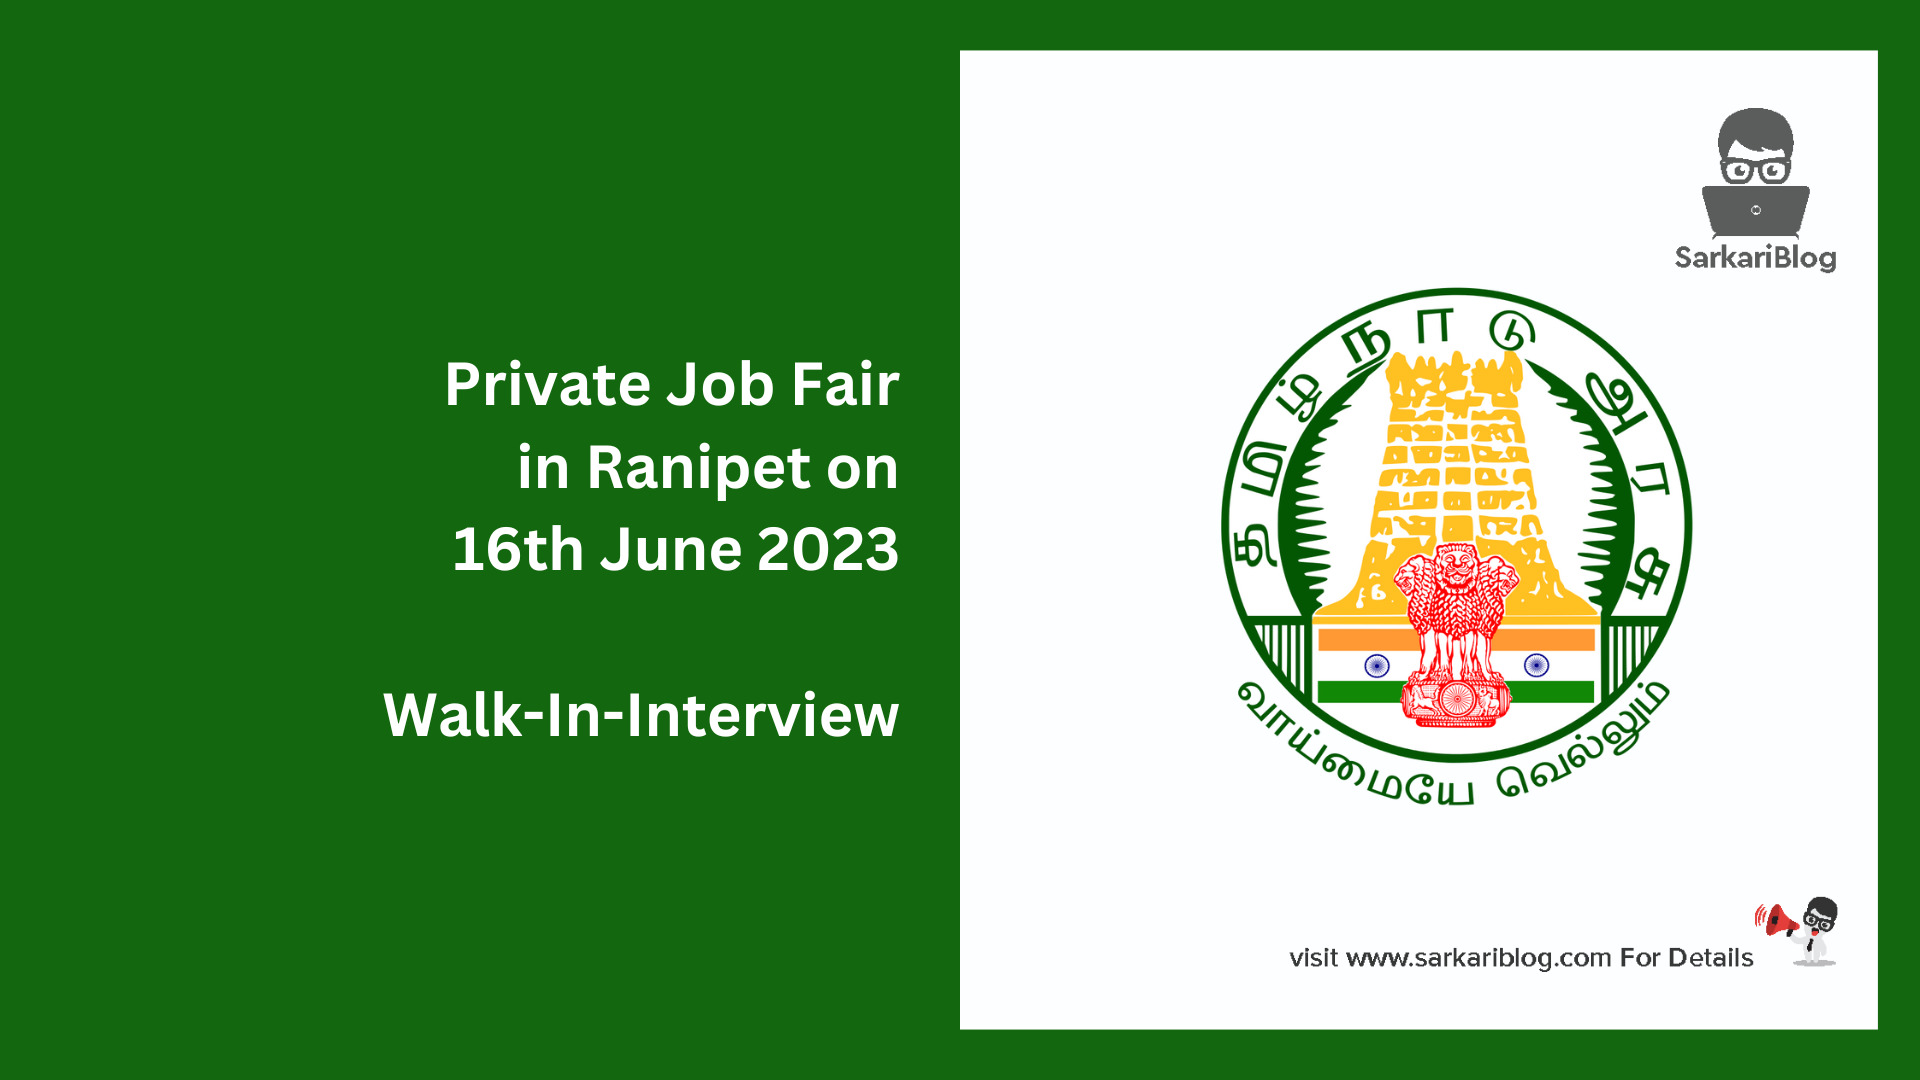 Private Job Fair in Ranipet on 16th June 2023